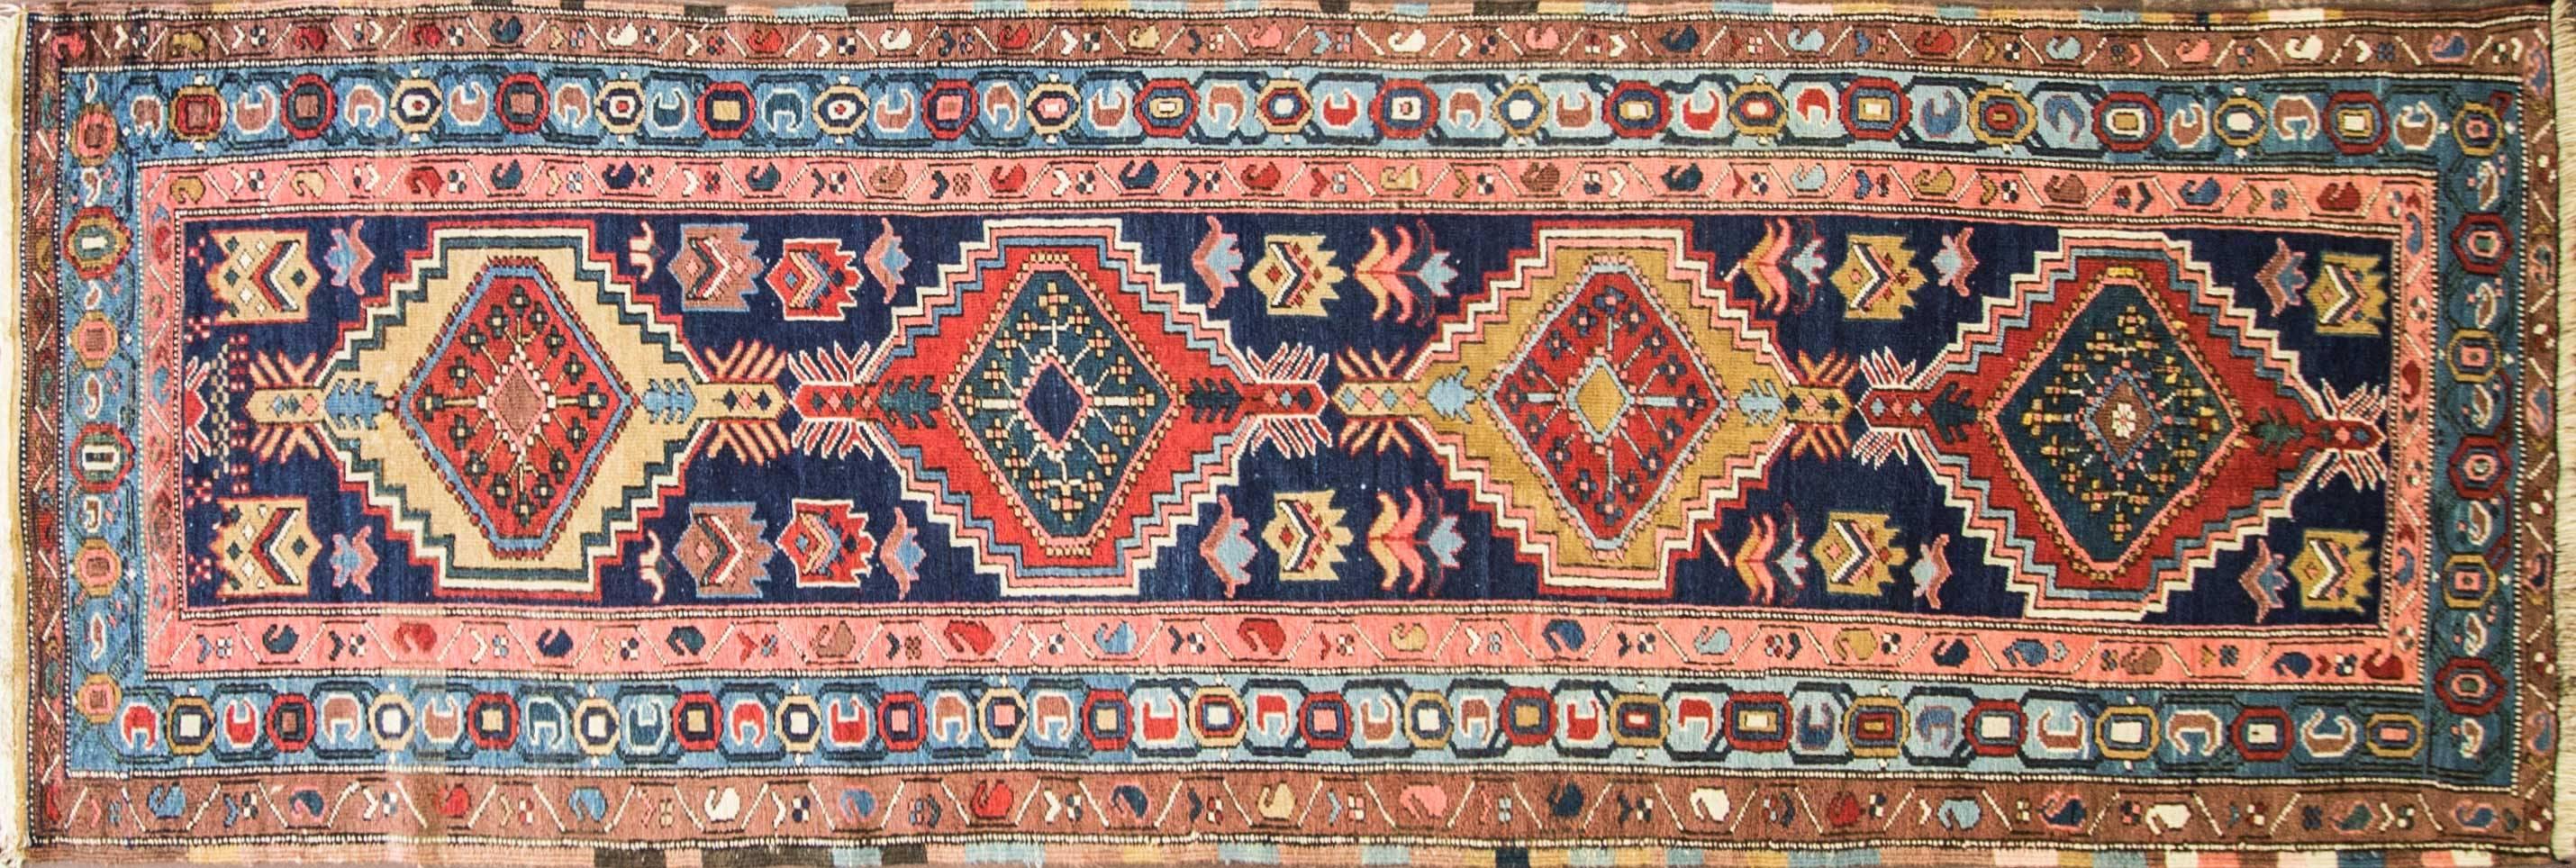 The rug contains an interwoven design of shapes and medallions containing fauna and plants from the area that impressed the carpet creator.
All the shapes and colors combine harmoniously to give the carpet the look of a complete composition. The